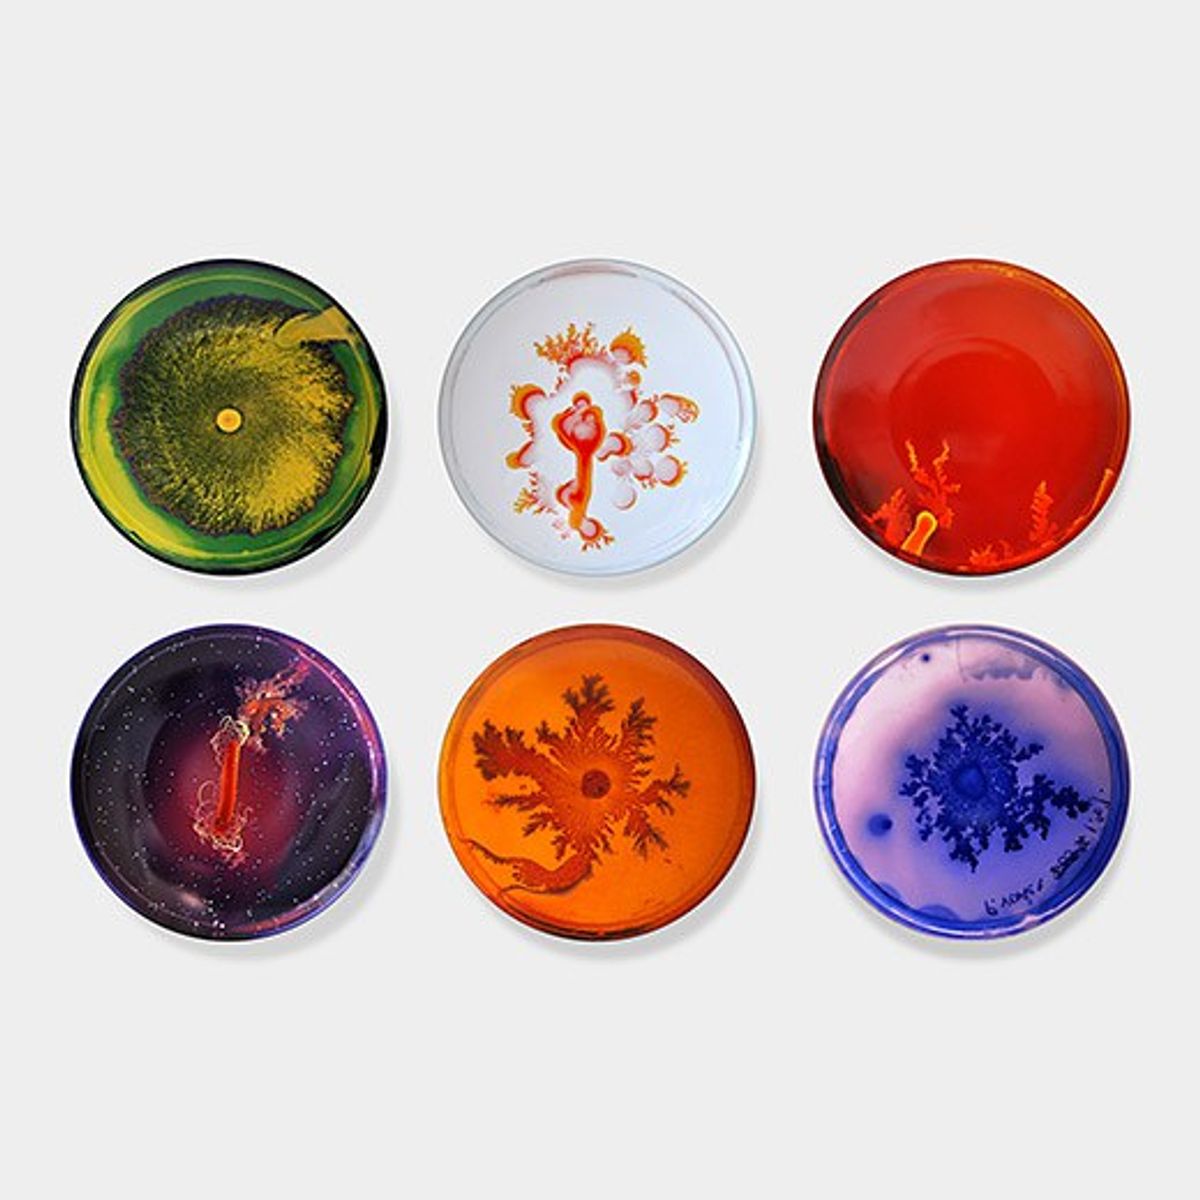 9 Artists Using Science As Inspiration